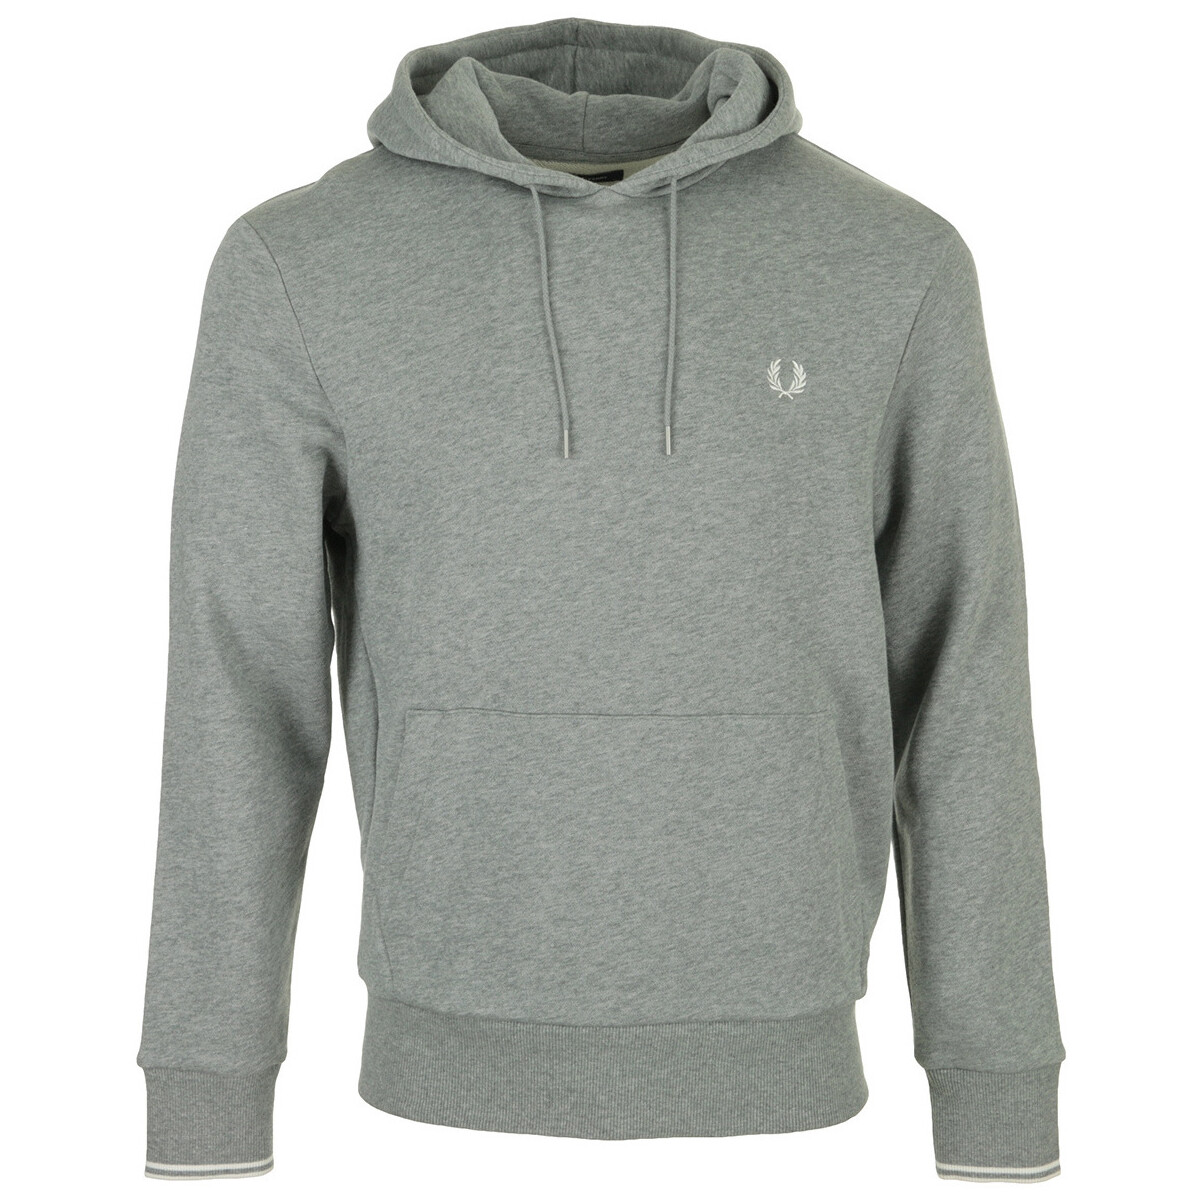 Textil Muži Mikiny Fred Perry Tipped Hooded Sweatshirt Šedá